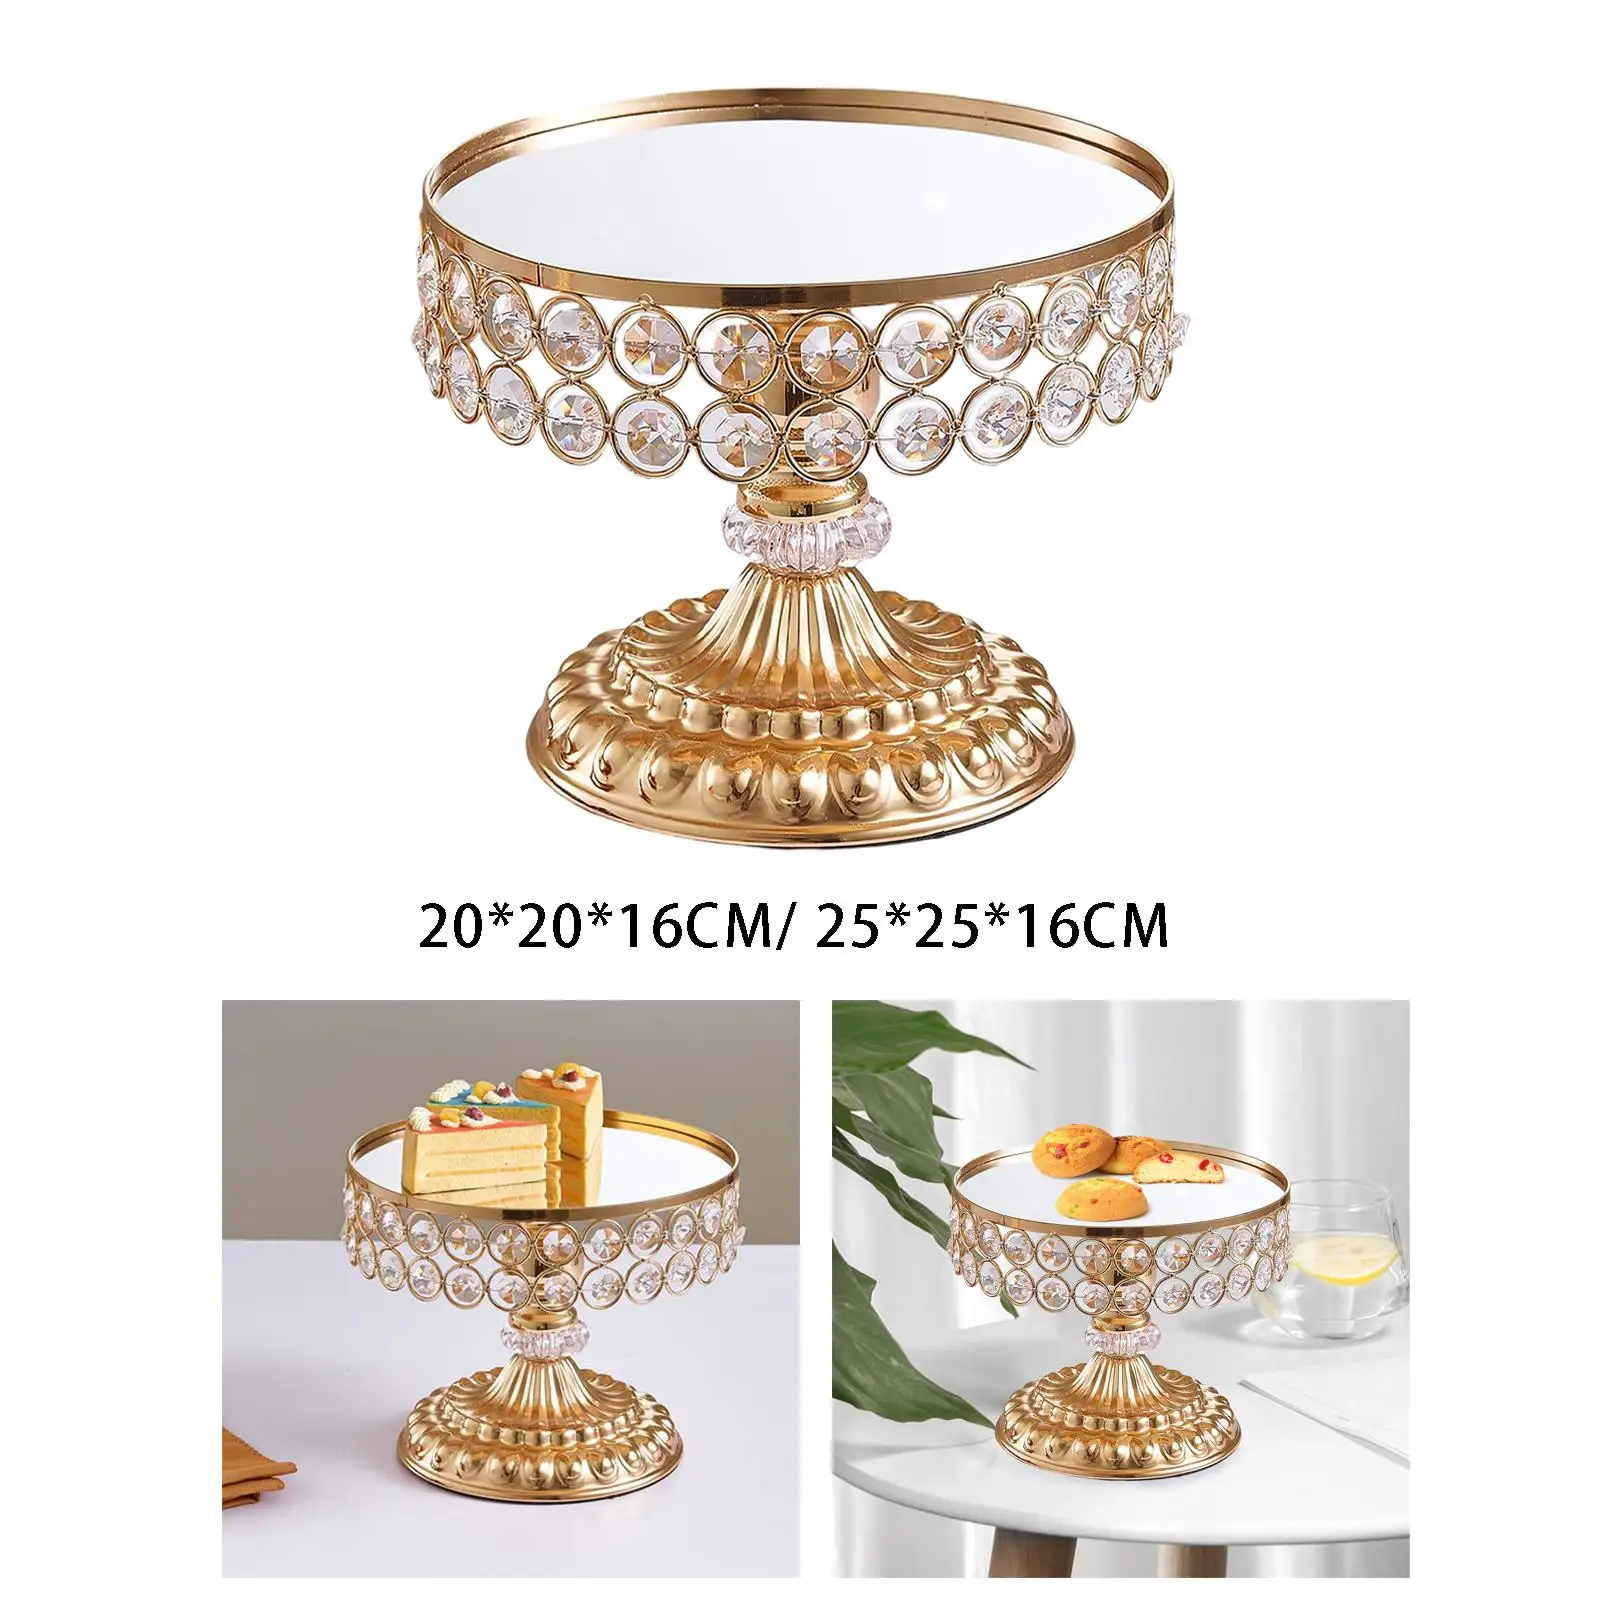 Cake Display Stand Cake Display Server Tray Footed Cake Platter Dessert Cake Stand for Banquet